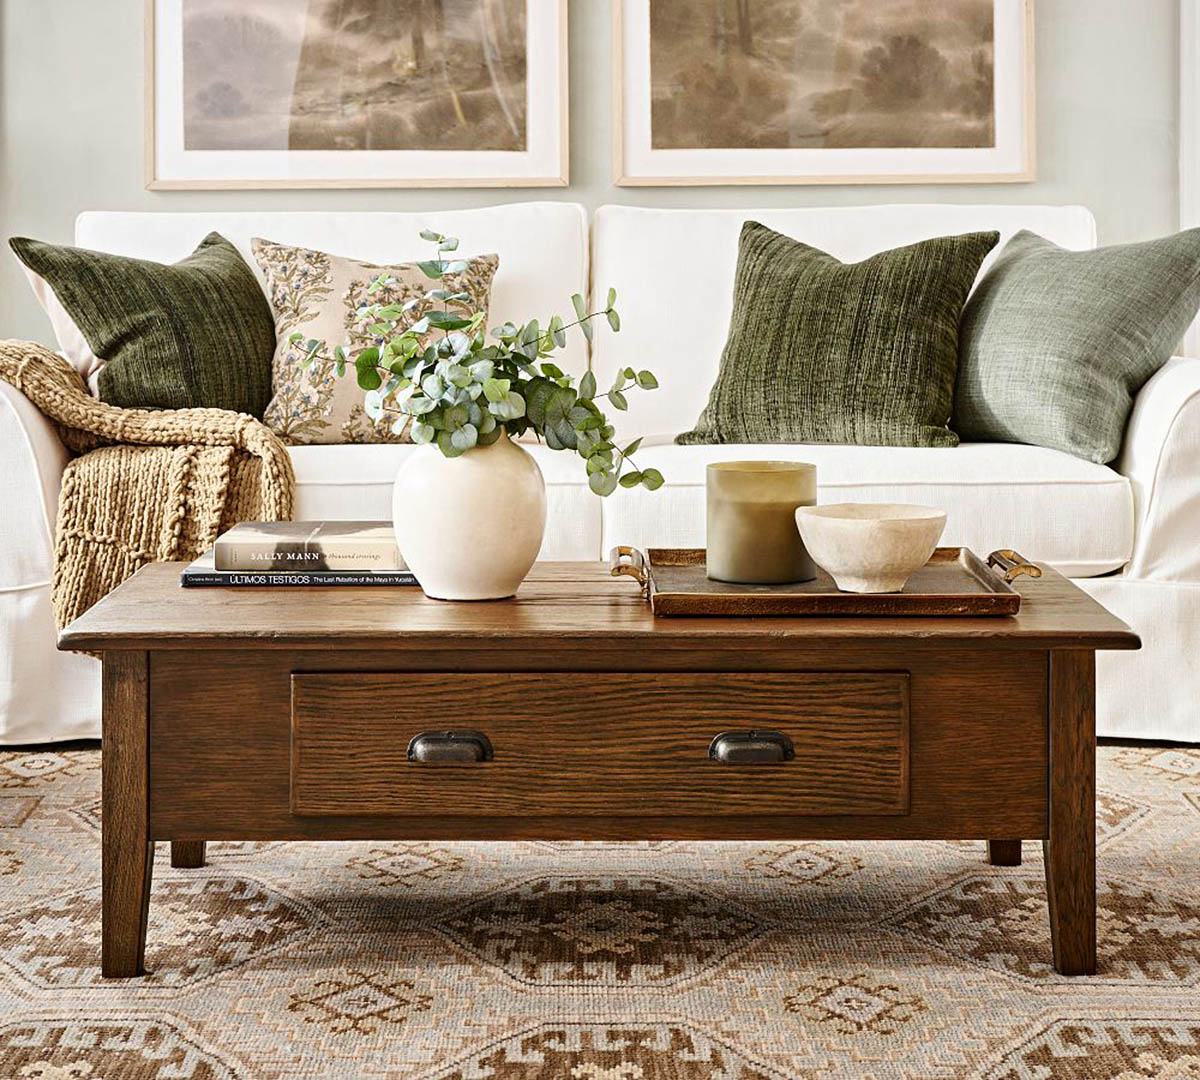 How To Decorate A Rectangle Coffee Table